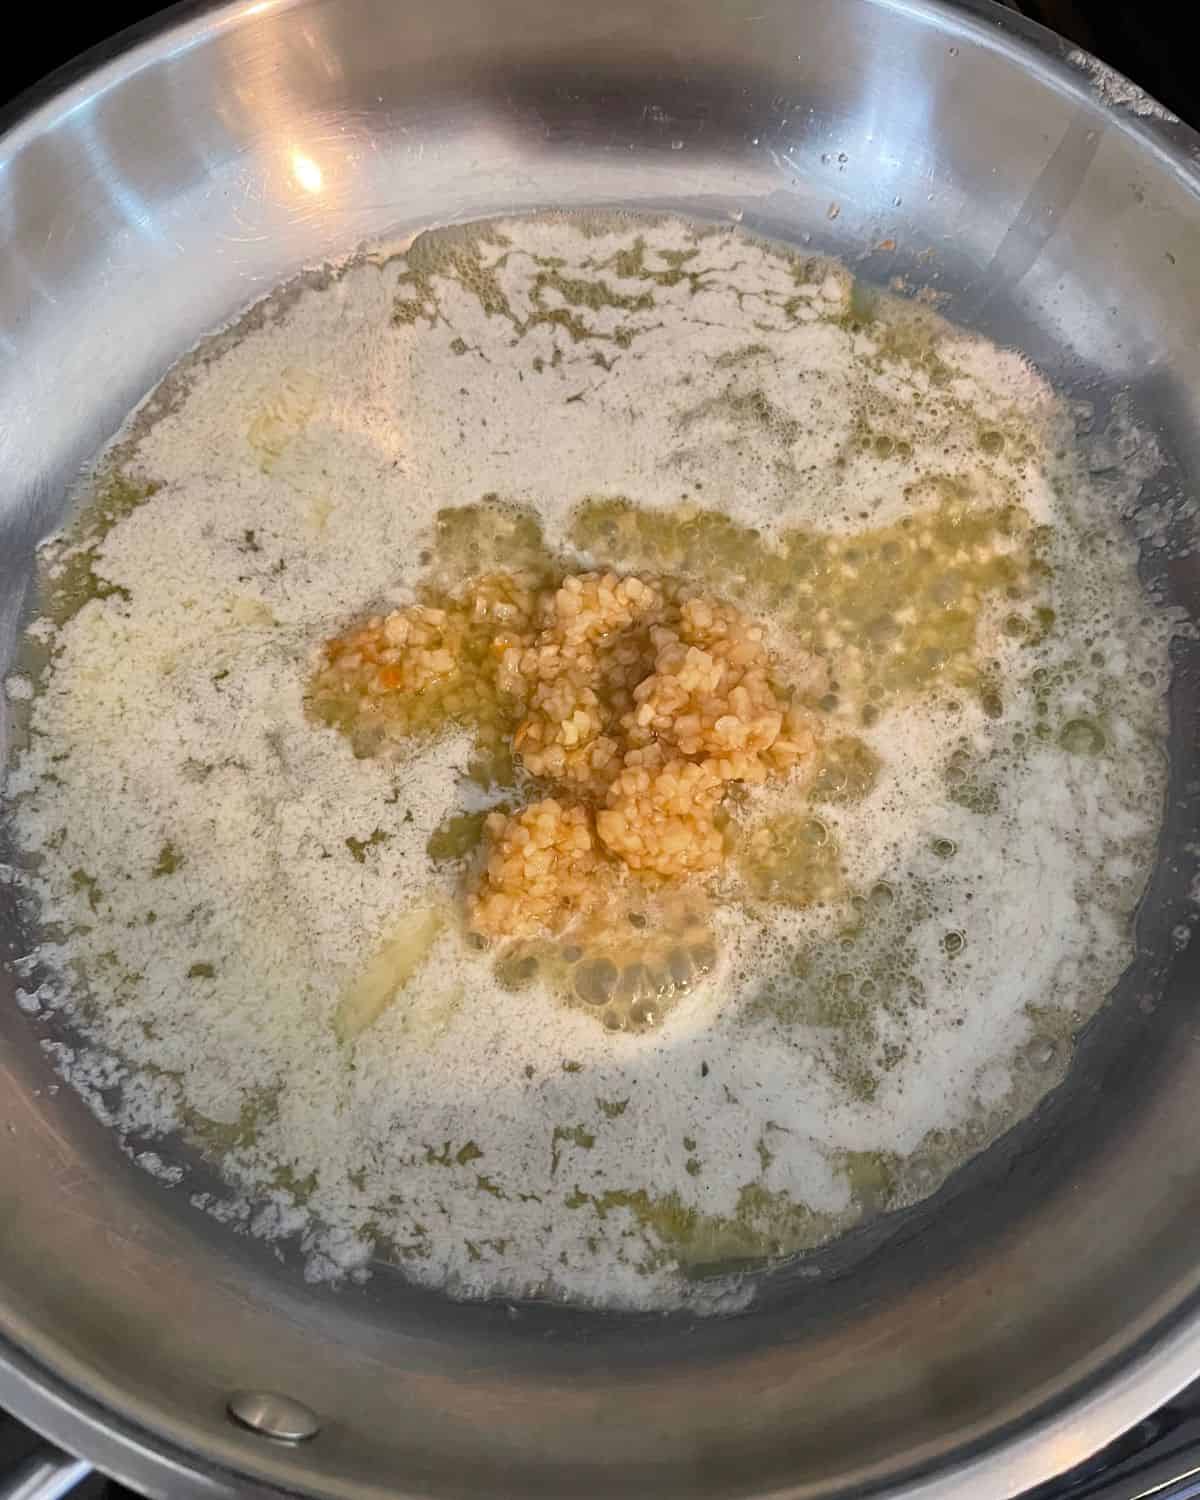 Minced garlic added to oil in a skillet.